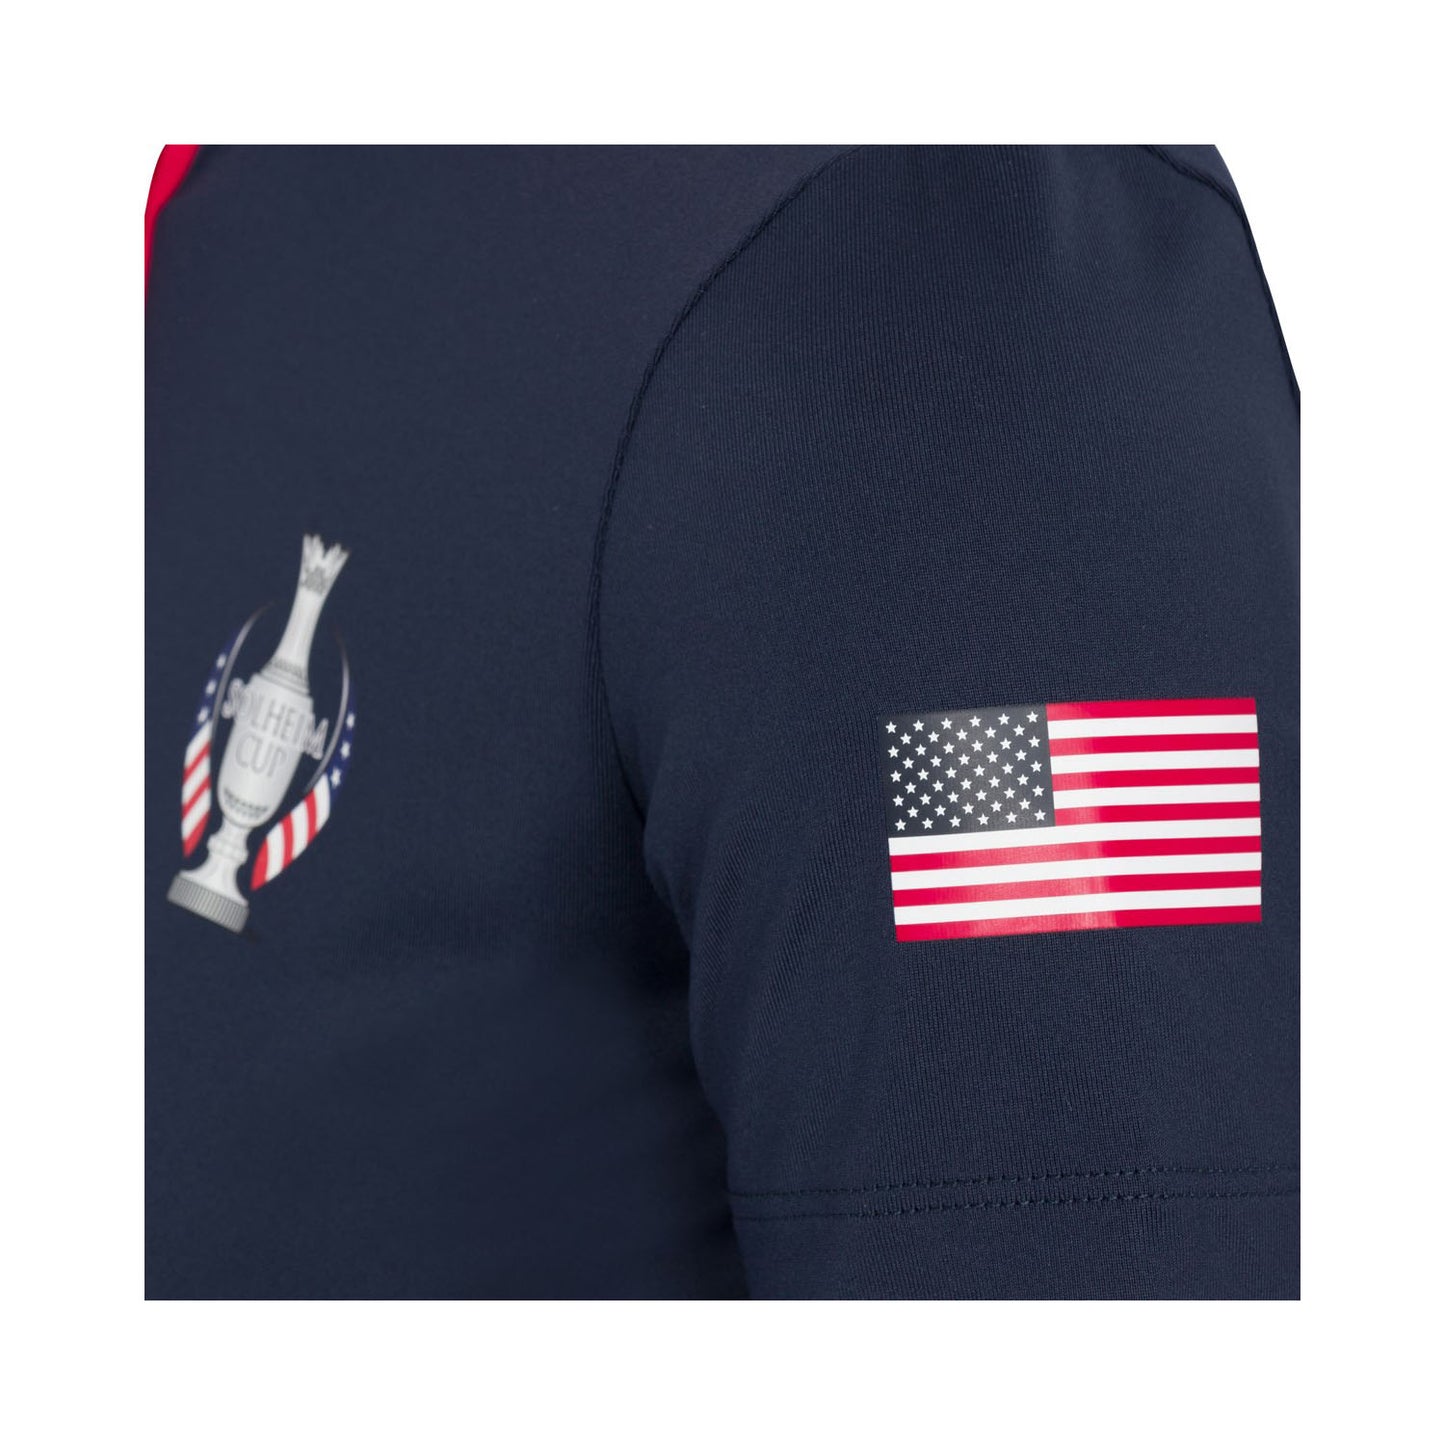 Dunning 2023 LPGA Official Solheim Cup Team Uniform Women's Short Sleeve Performance Polo in Halo / Glory - Lifestyle Zoomed in Left Side Patch View